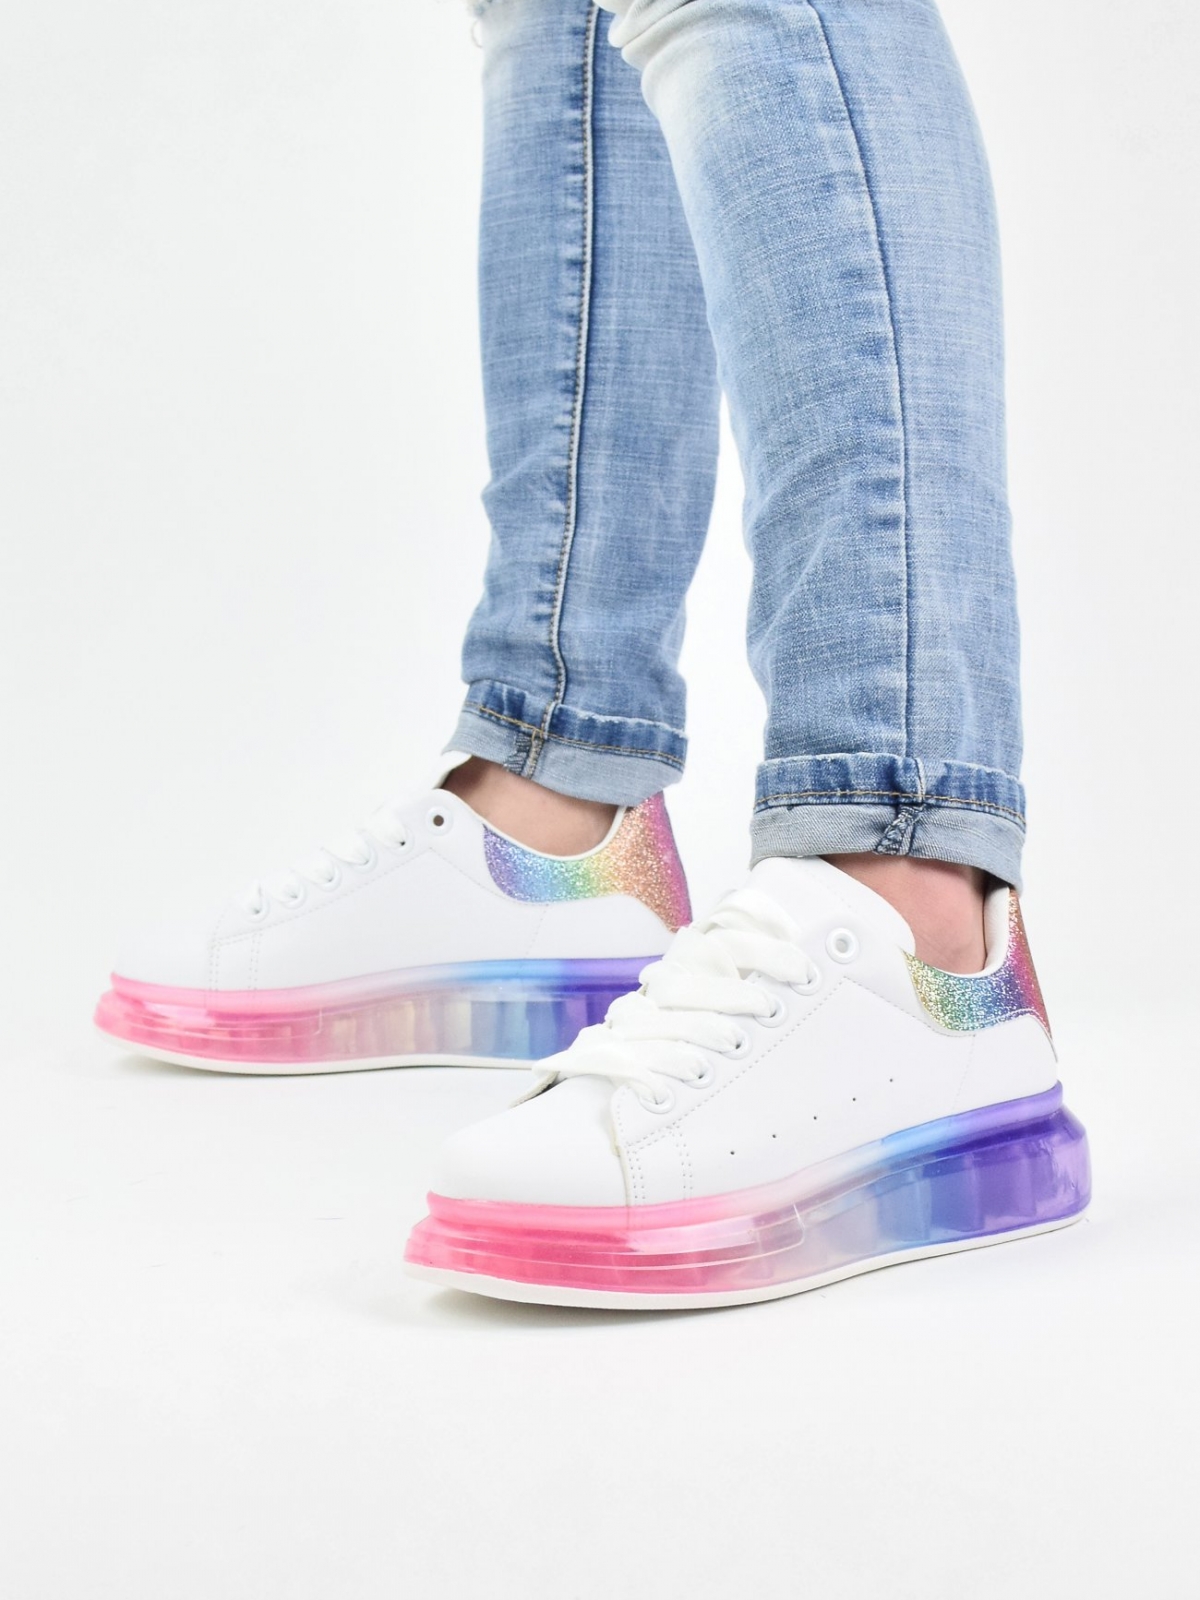 American style sneakers in multicolor white